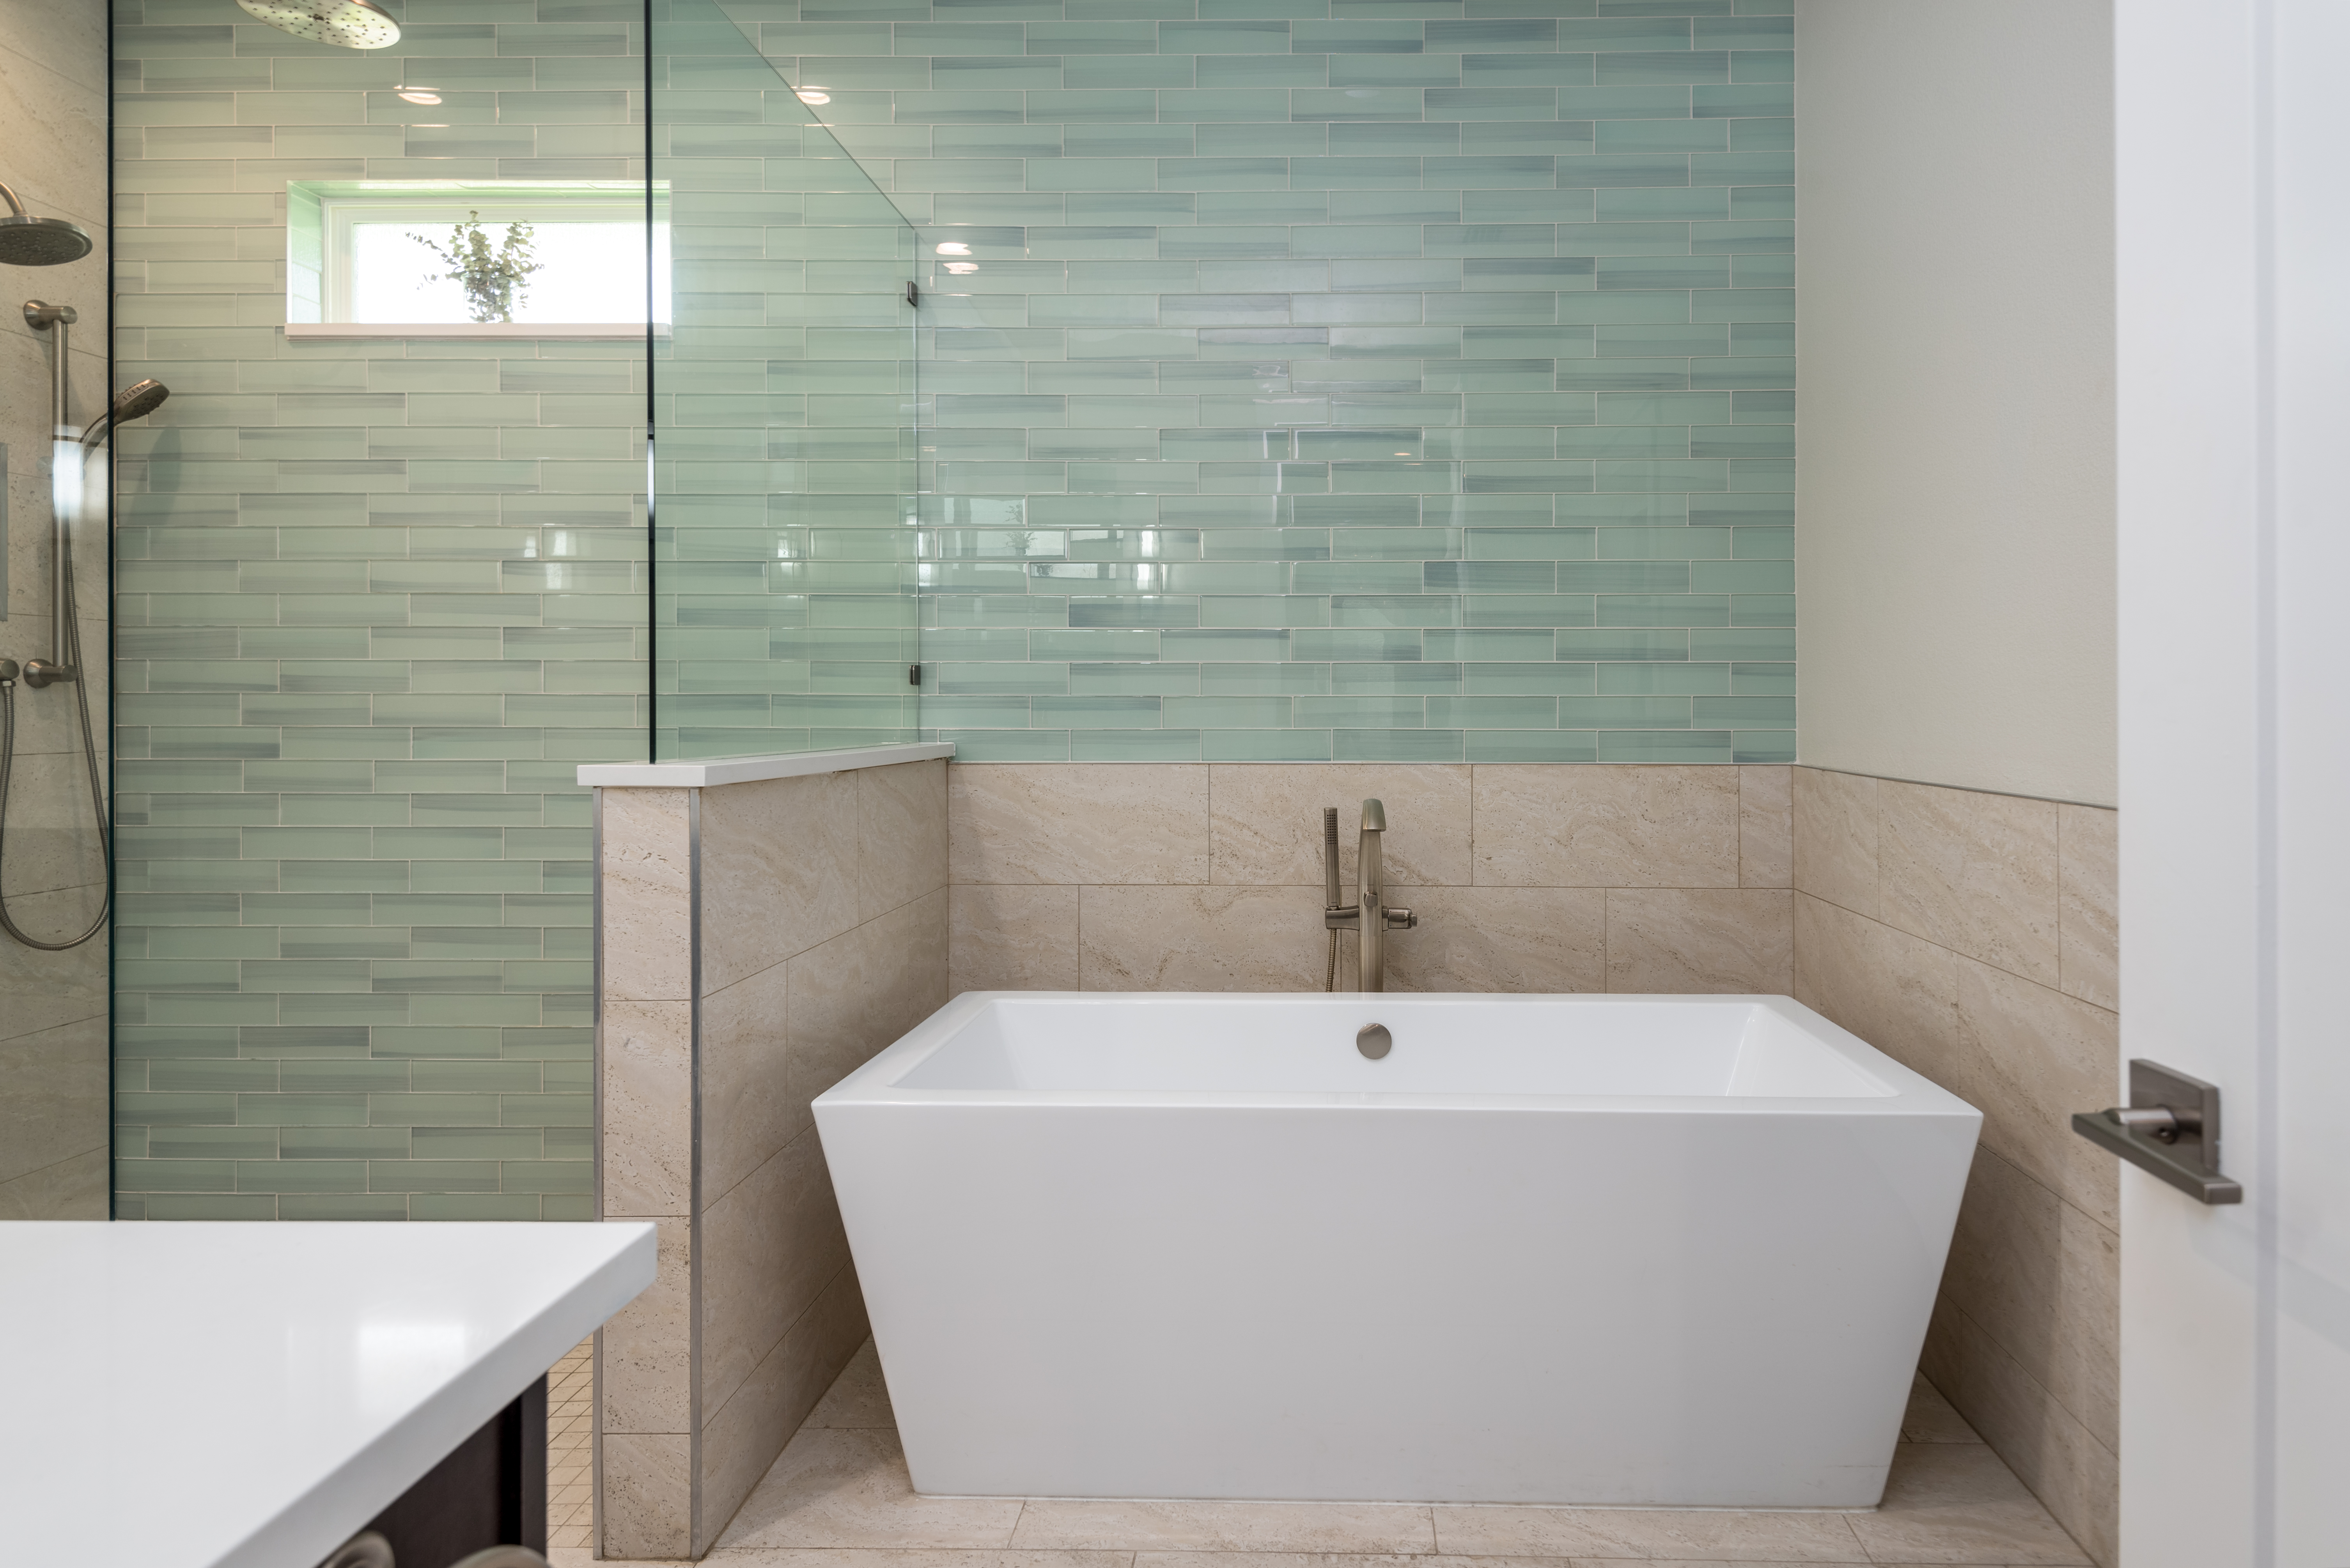 <span  class="uc_style_uc_tiles_grid_image_elementor_uc_items_attribute_title" style="color:#ffffff;">Master Tub - High Res</span>